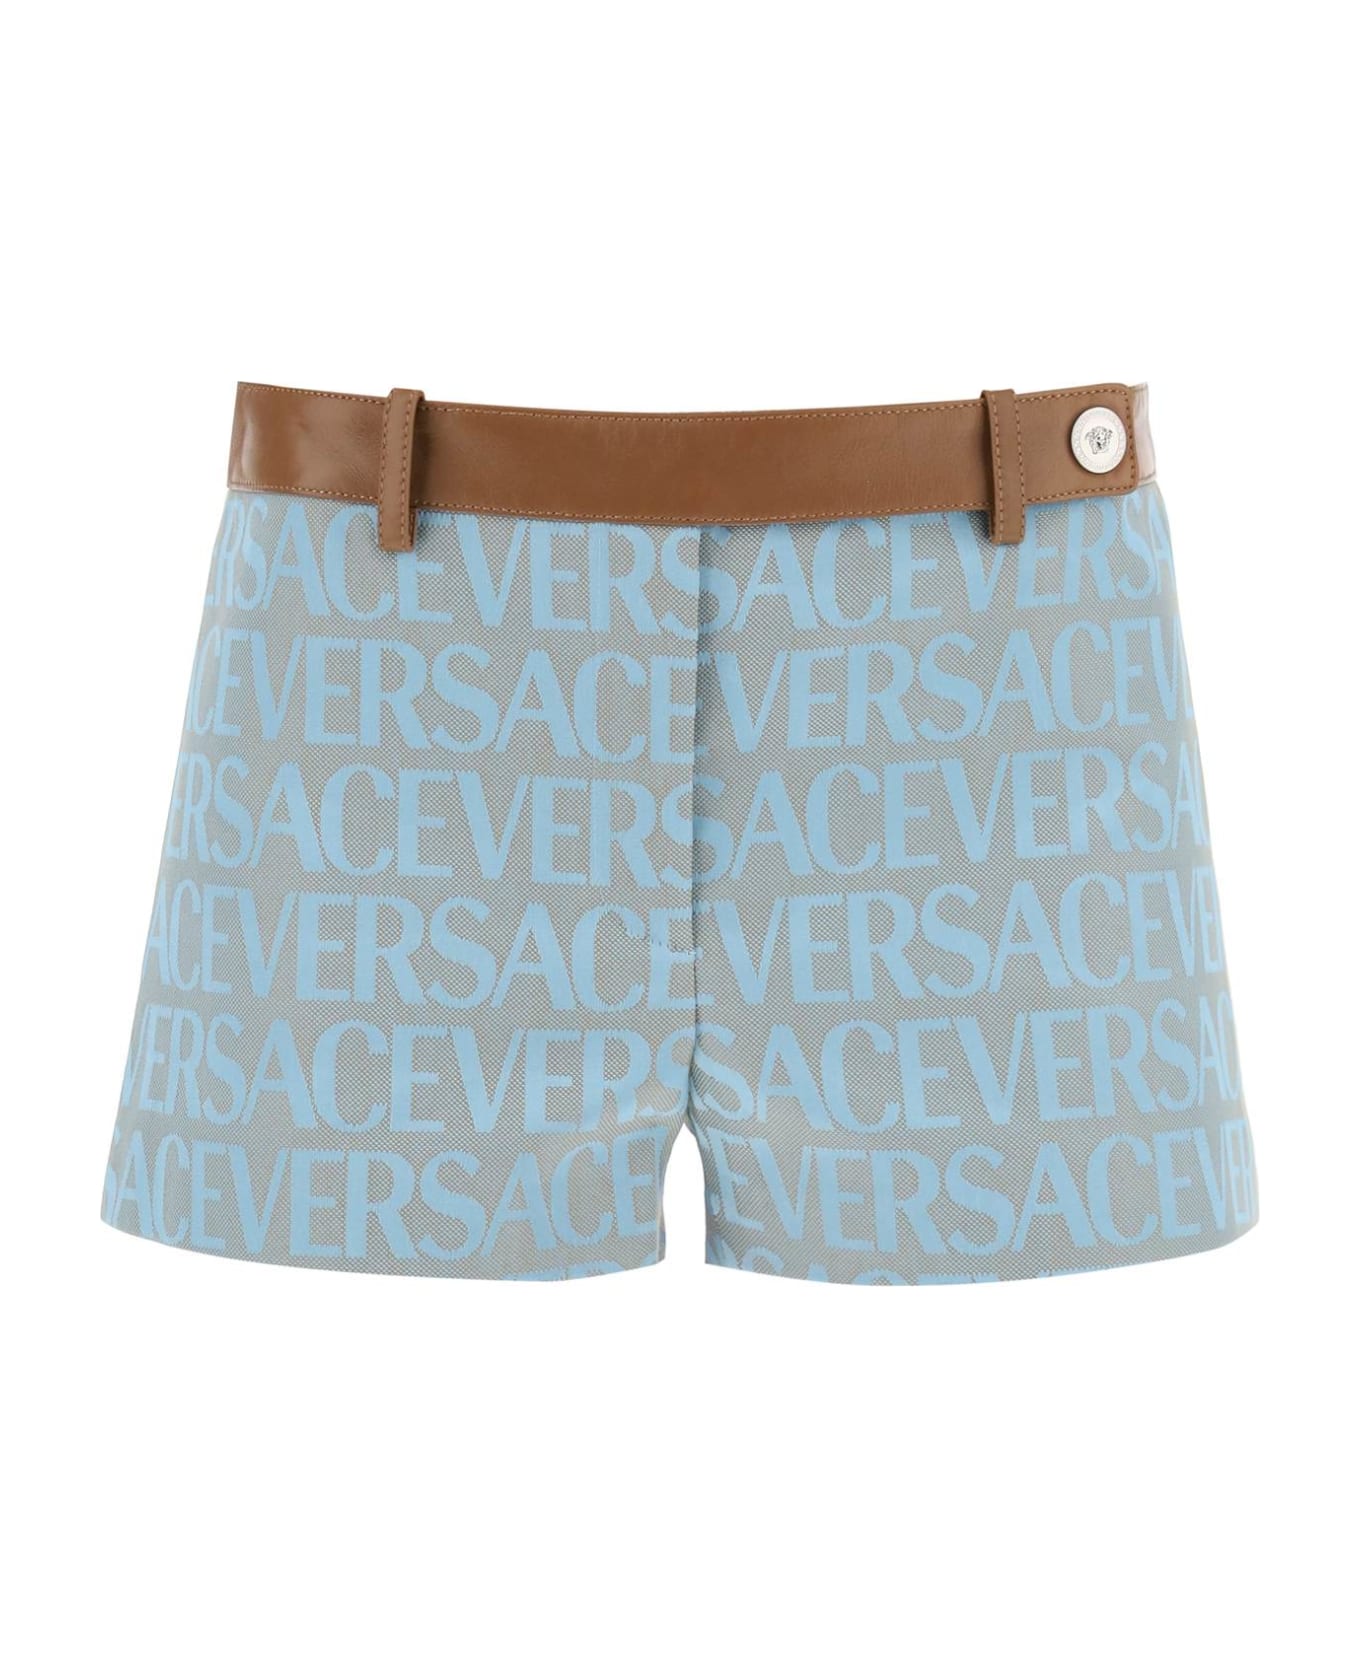 Versace Monogram Shorts With Leather Band - PALE BLUE BEIGE (Light blue)